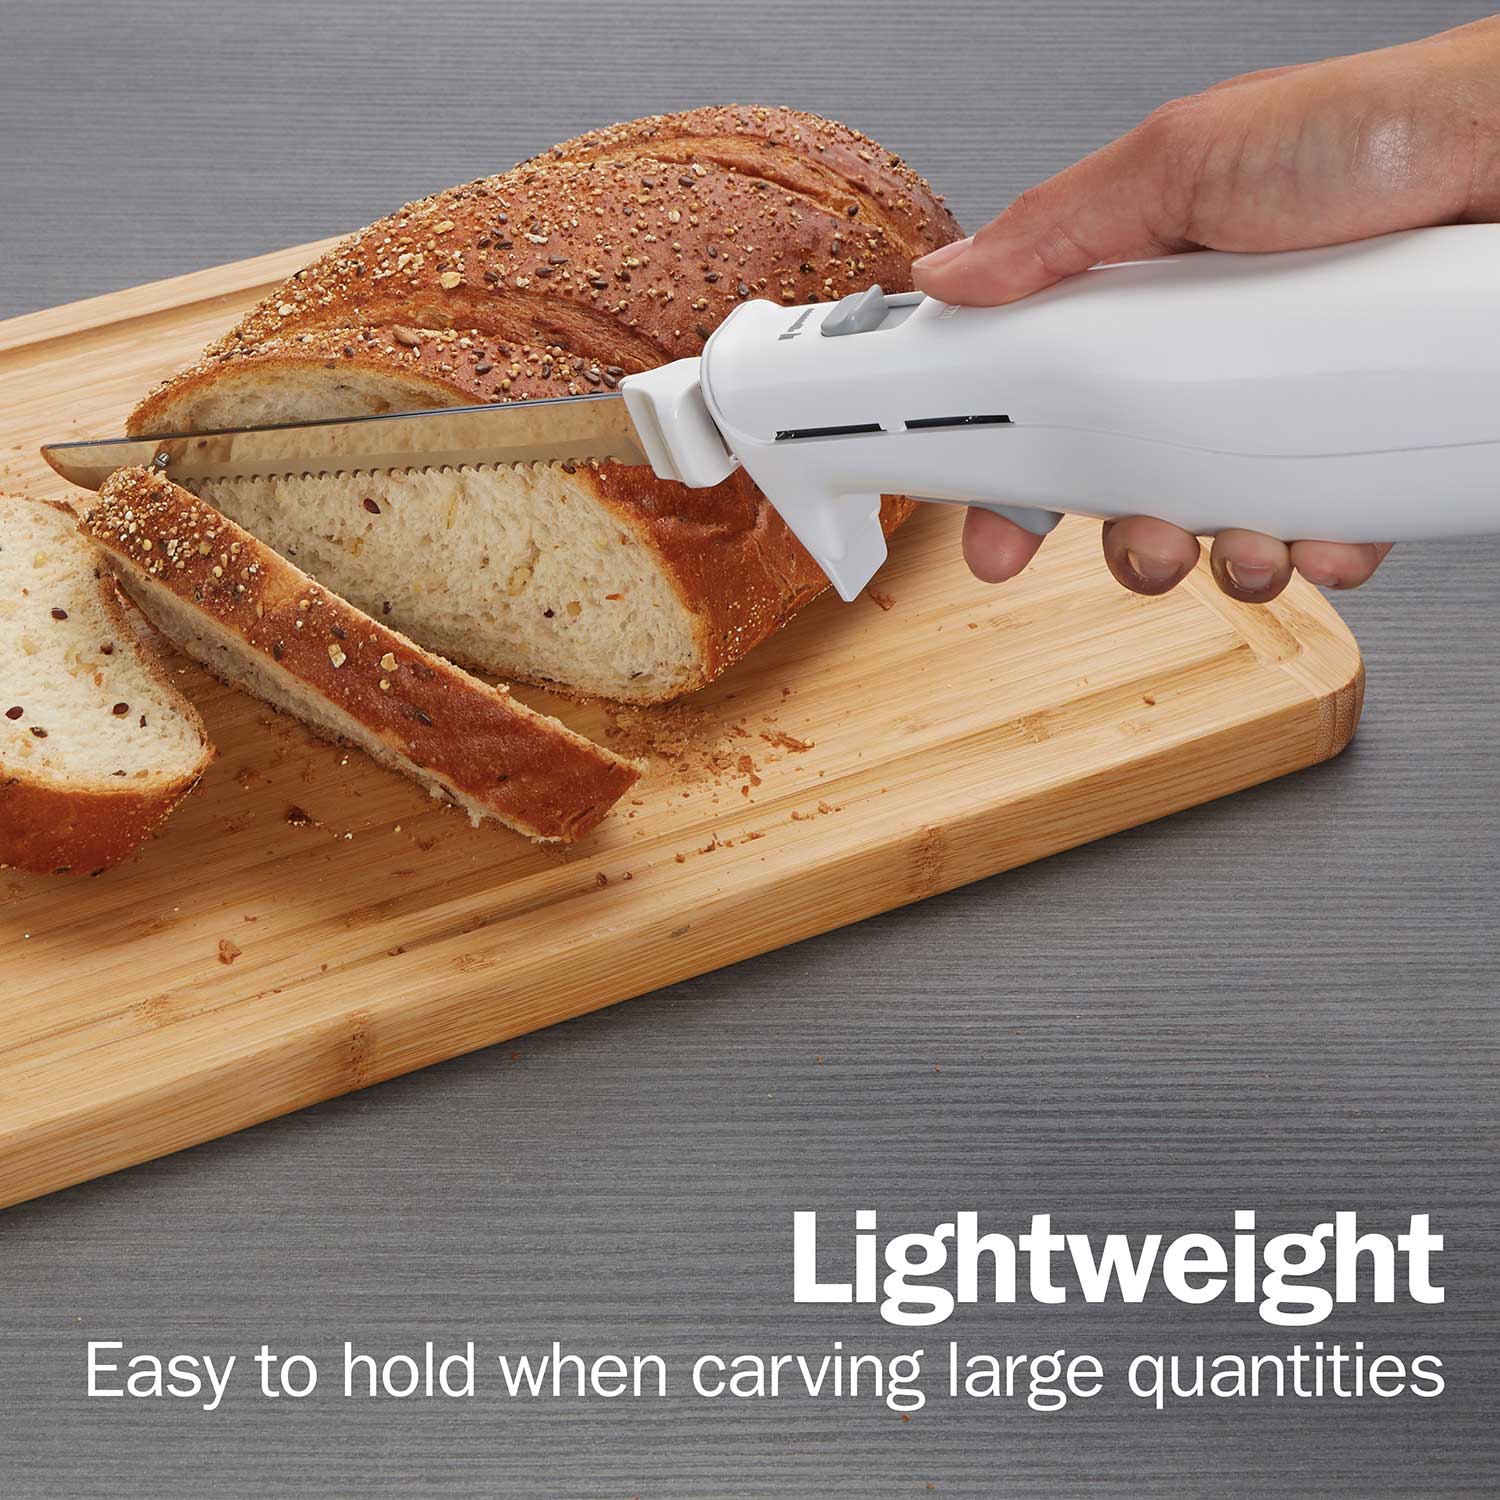 Slice Right Electric Knife